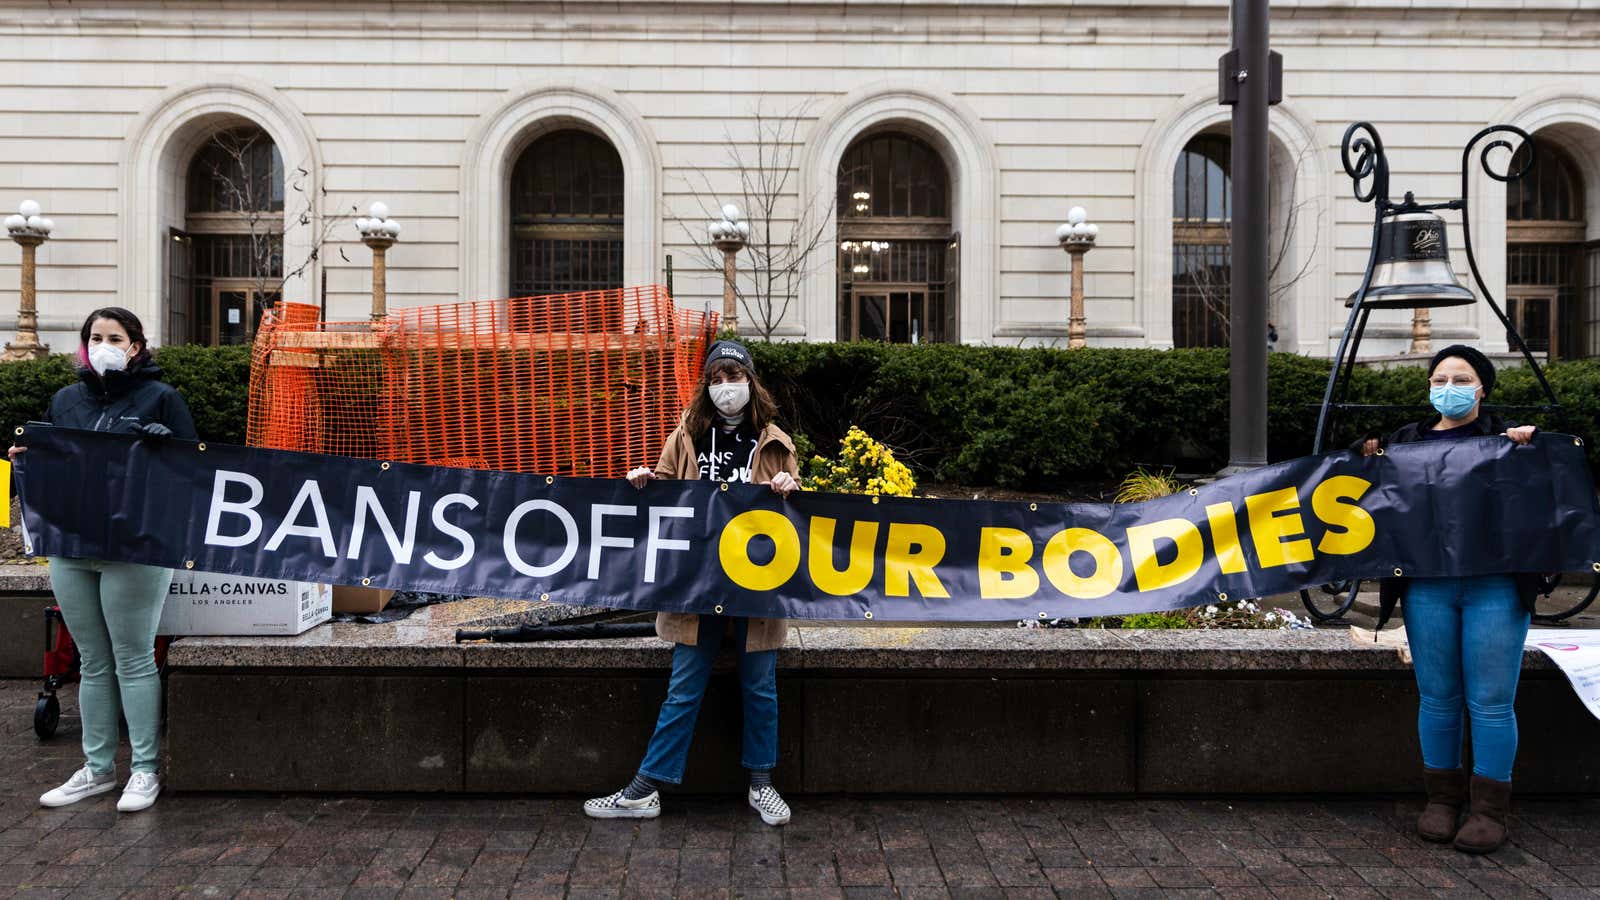 26 states have laws ready to limit abortion